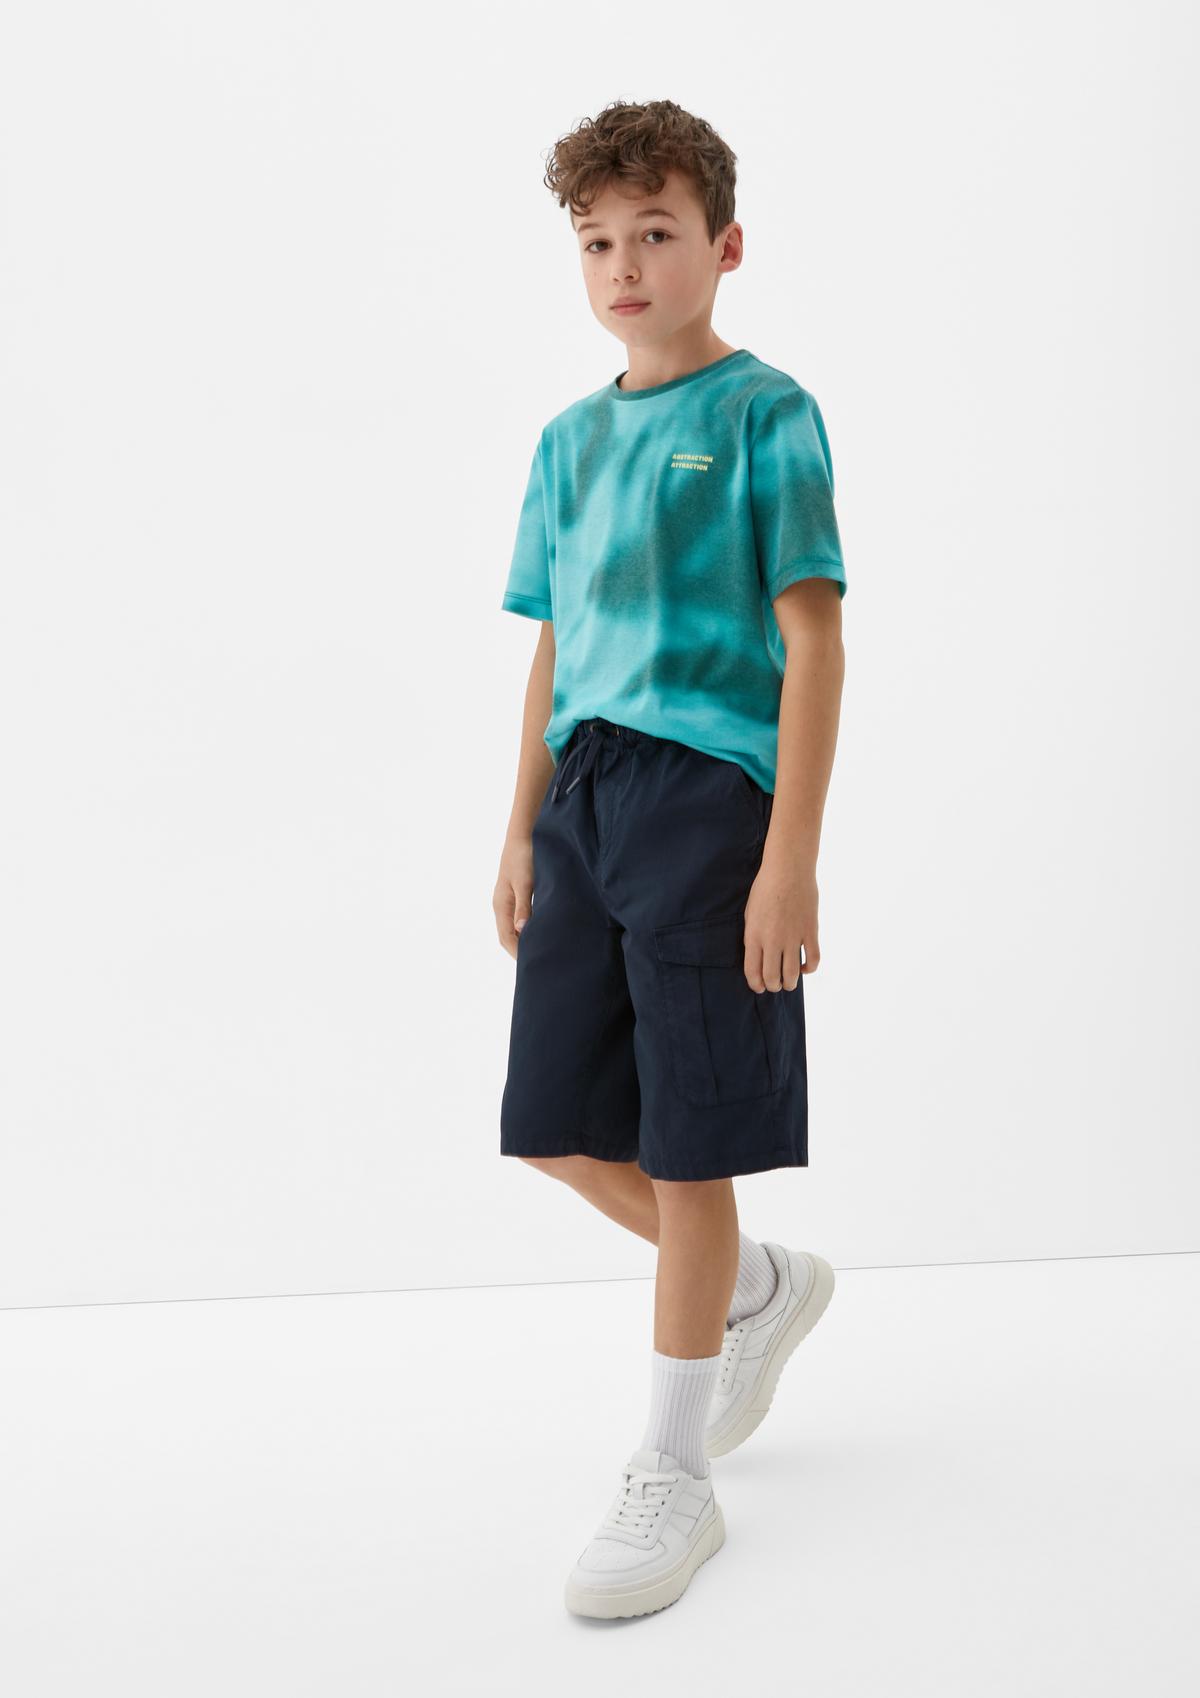 teens boys Bermuda Find and online for shorts